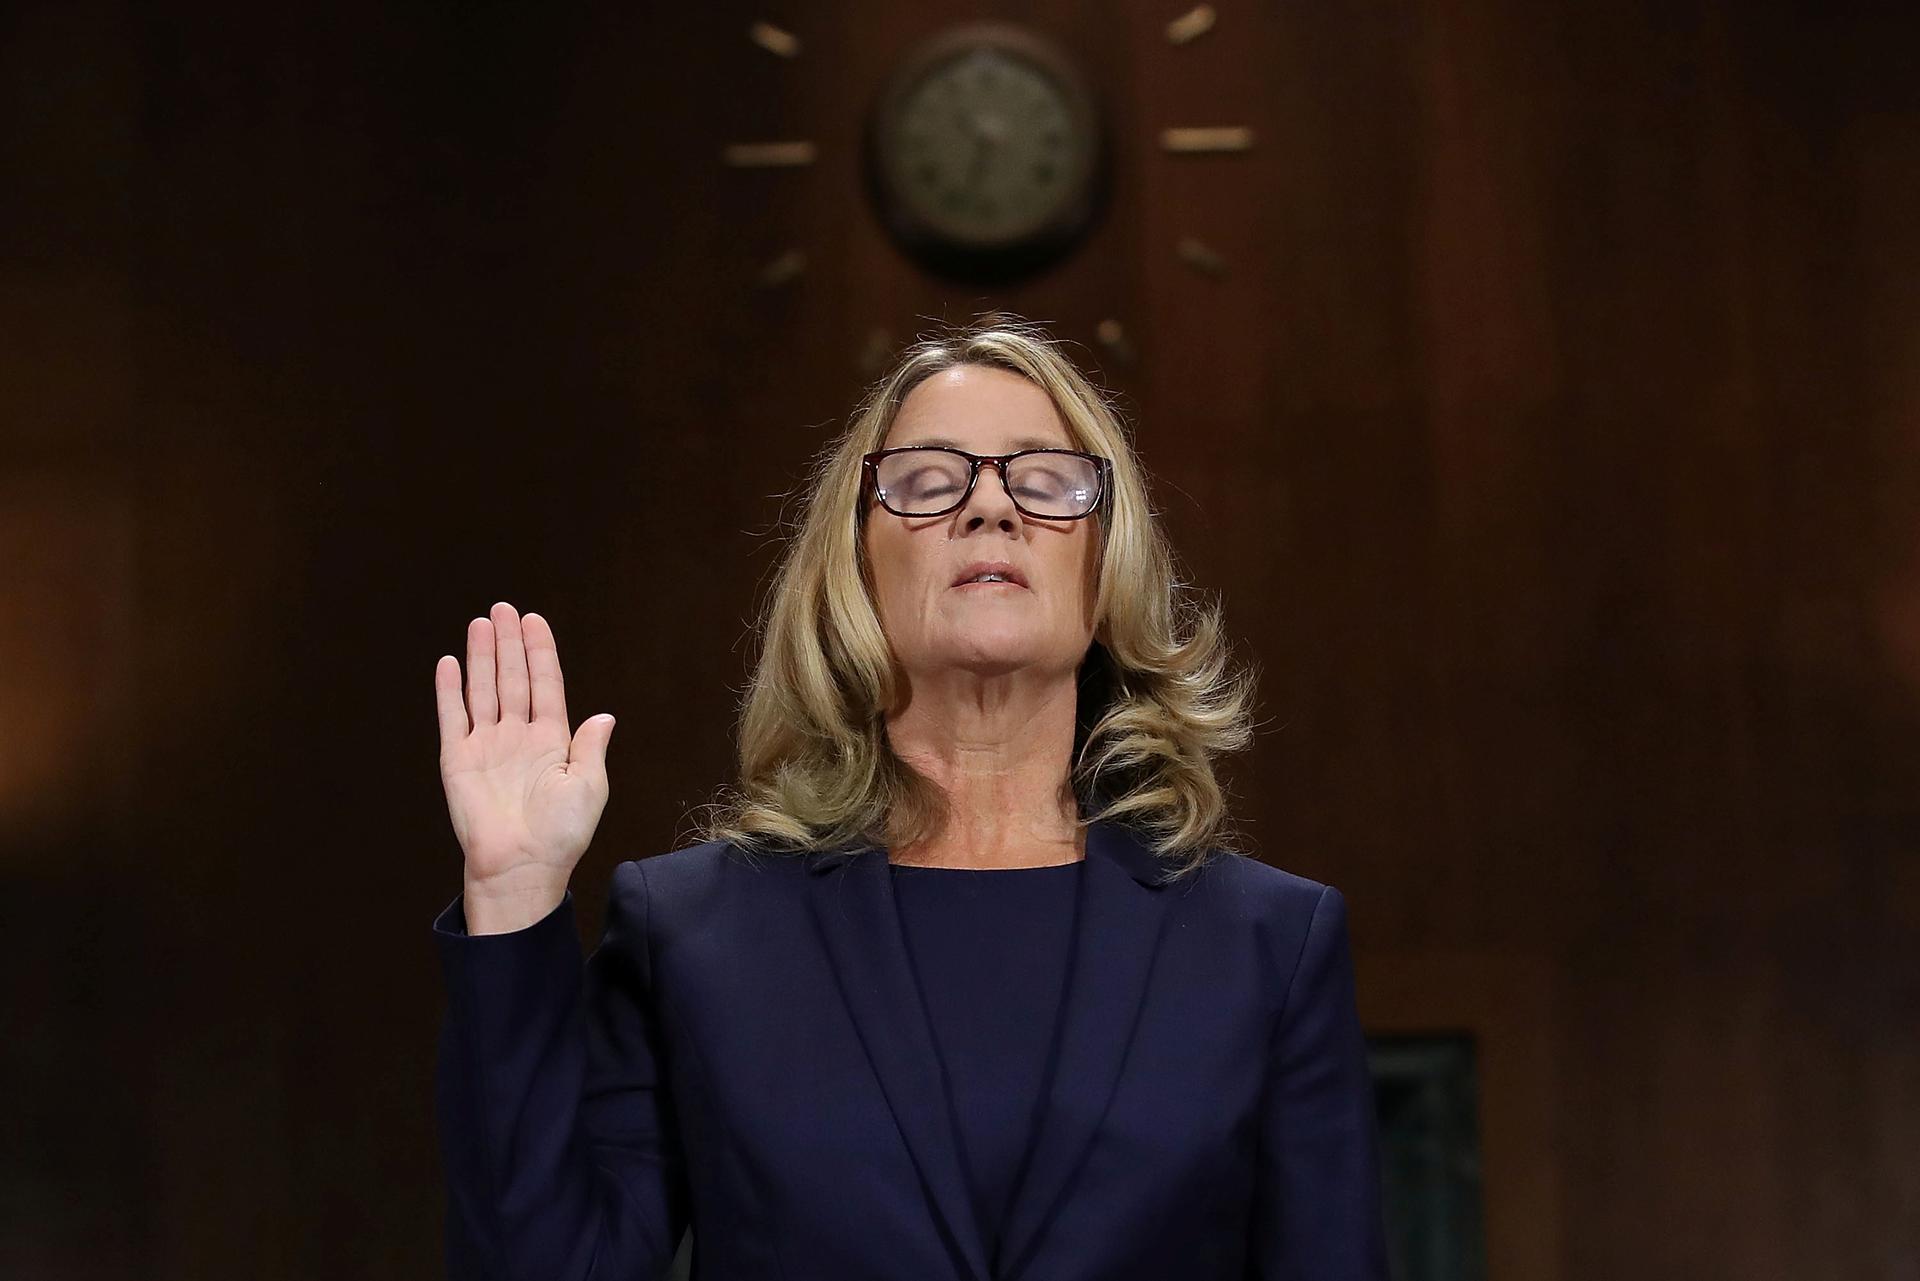 Dr. Christine Blasey Ford is shown with her right hand raised and eyes closed.